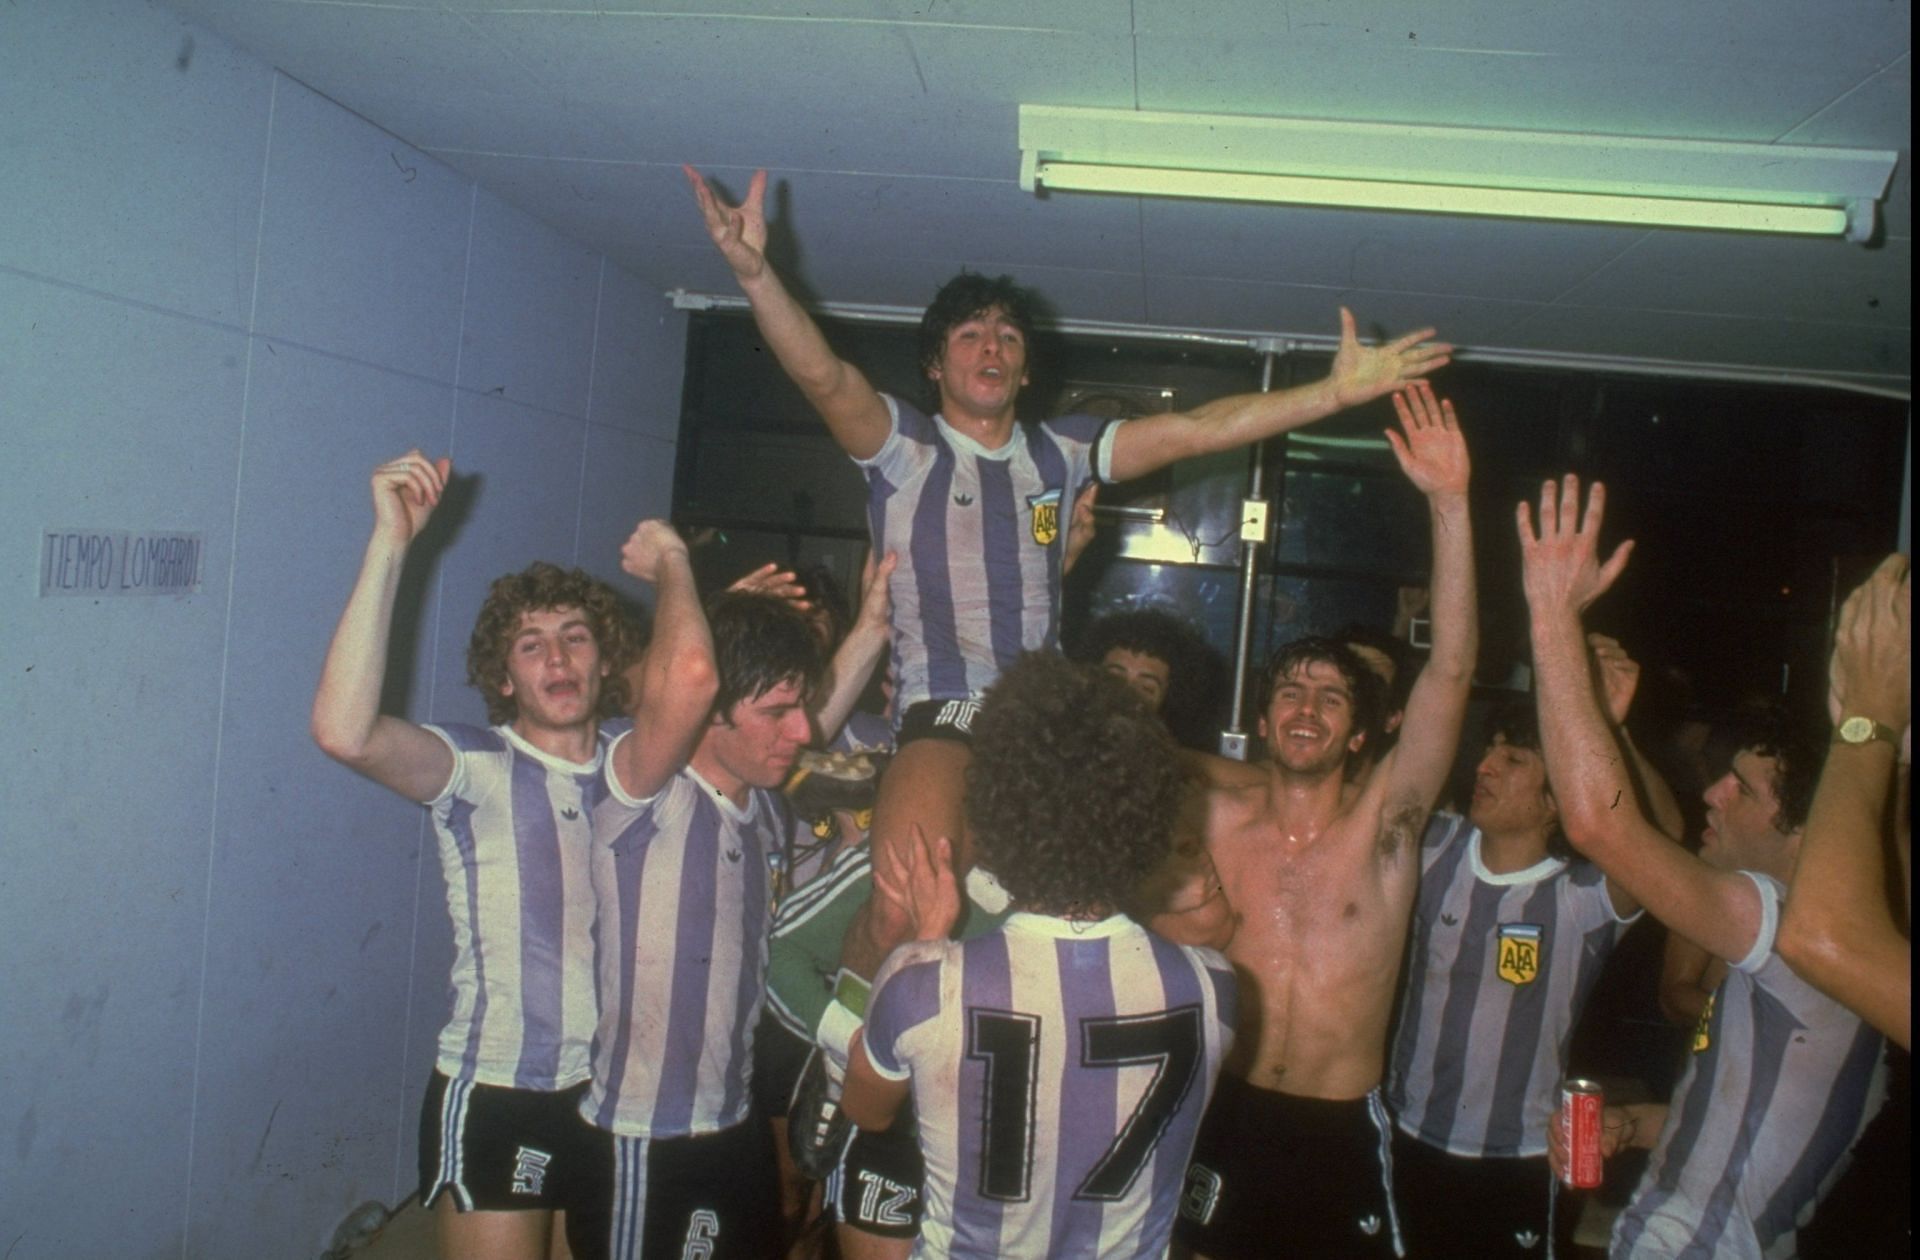 Diego Maradona of Argentina celebrating on his team mates shoulders after winning a game.